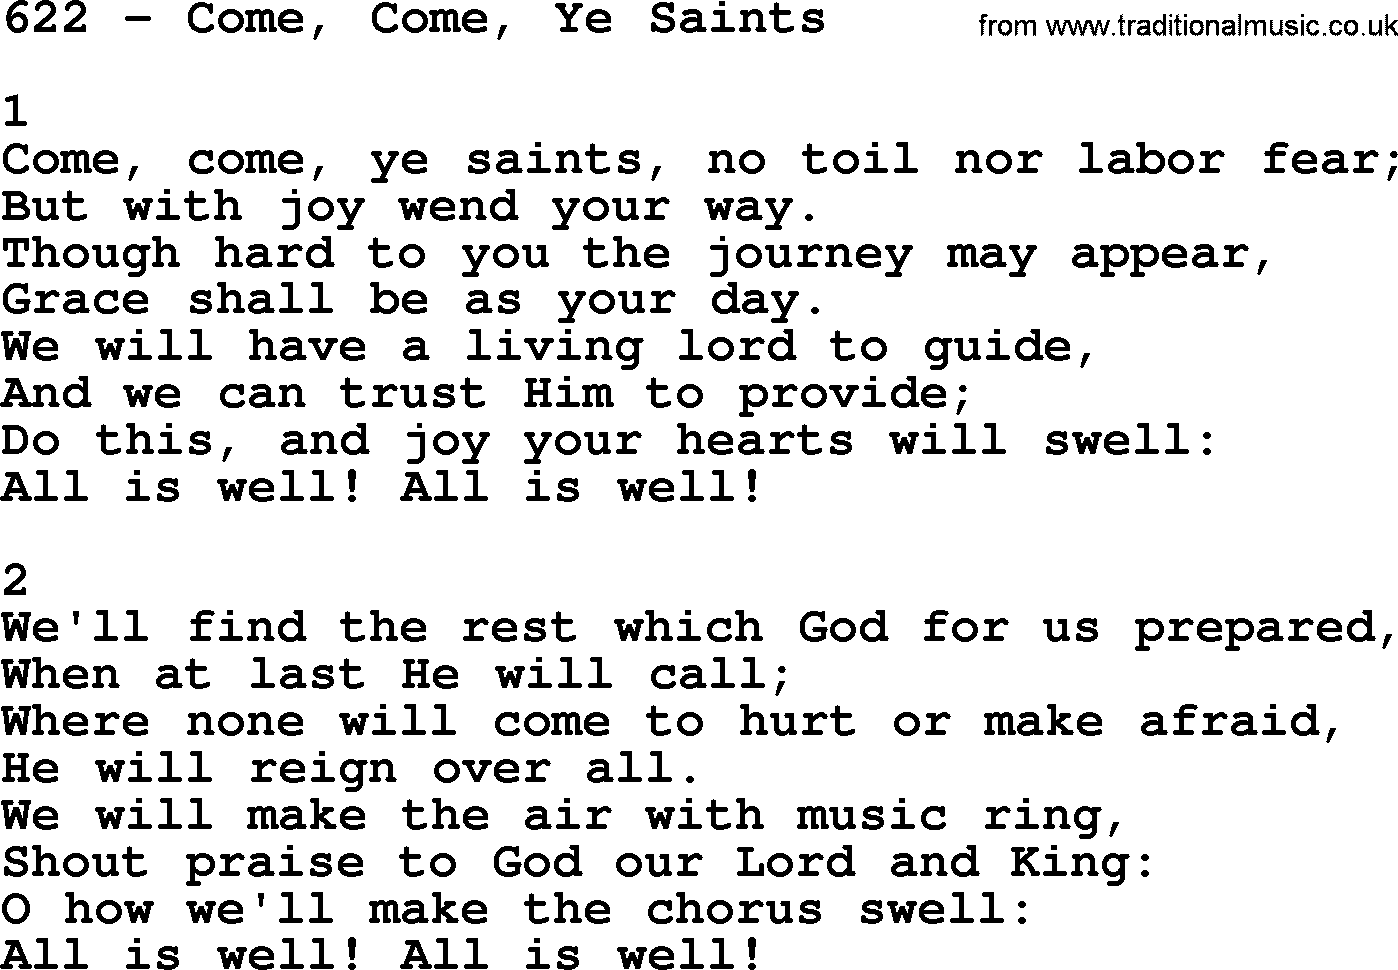 Complete Adventis Hymnal, title: 622-Come, Come, Ye Saints, with lyrics, midi, mp3, powerpoints(PPT) and PDF,